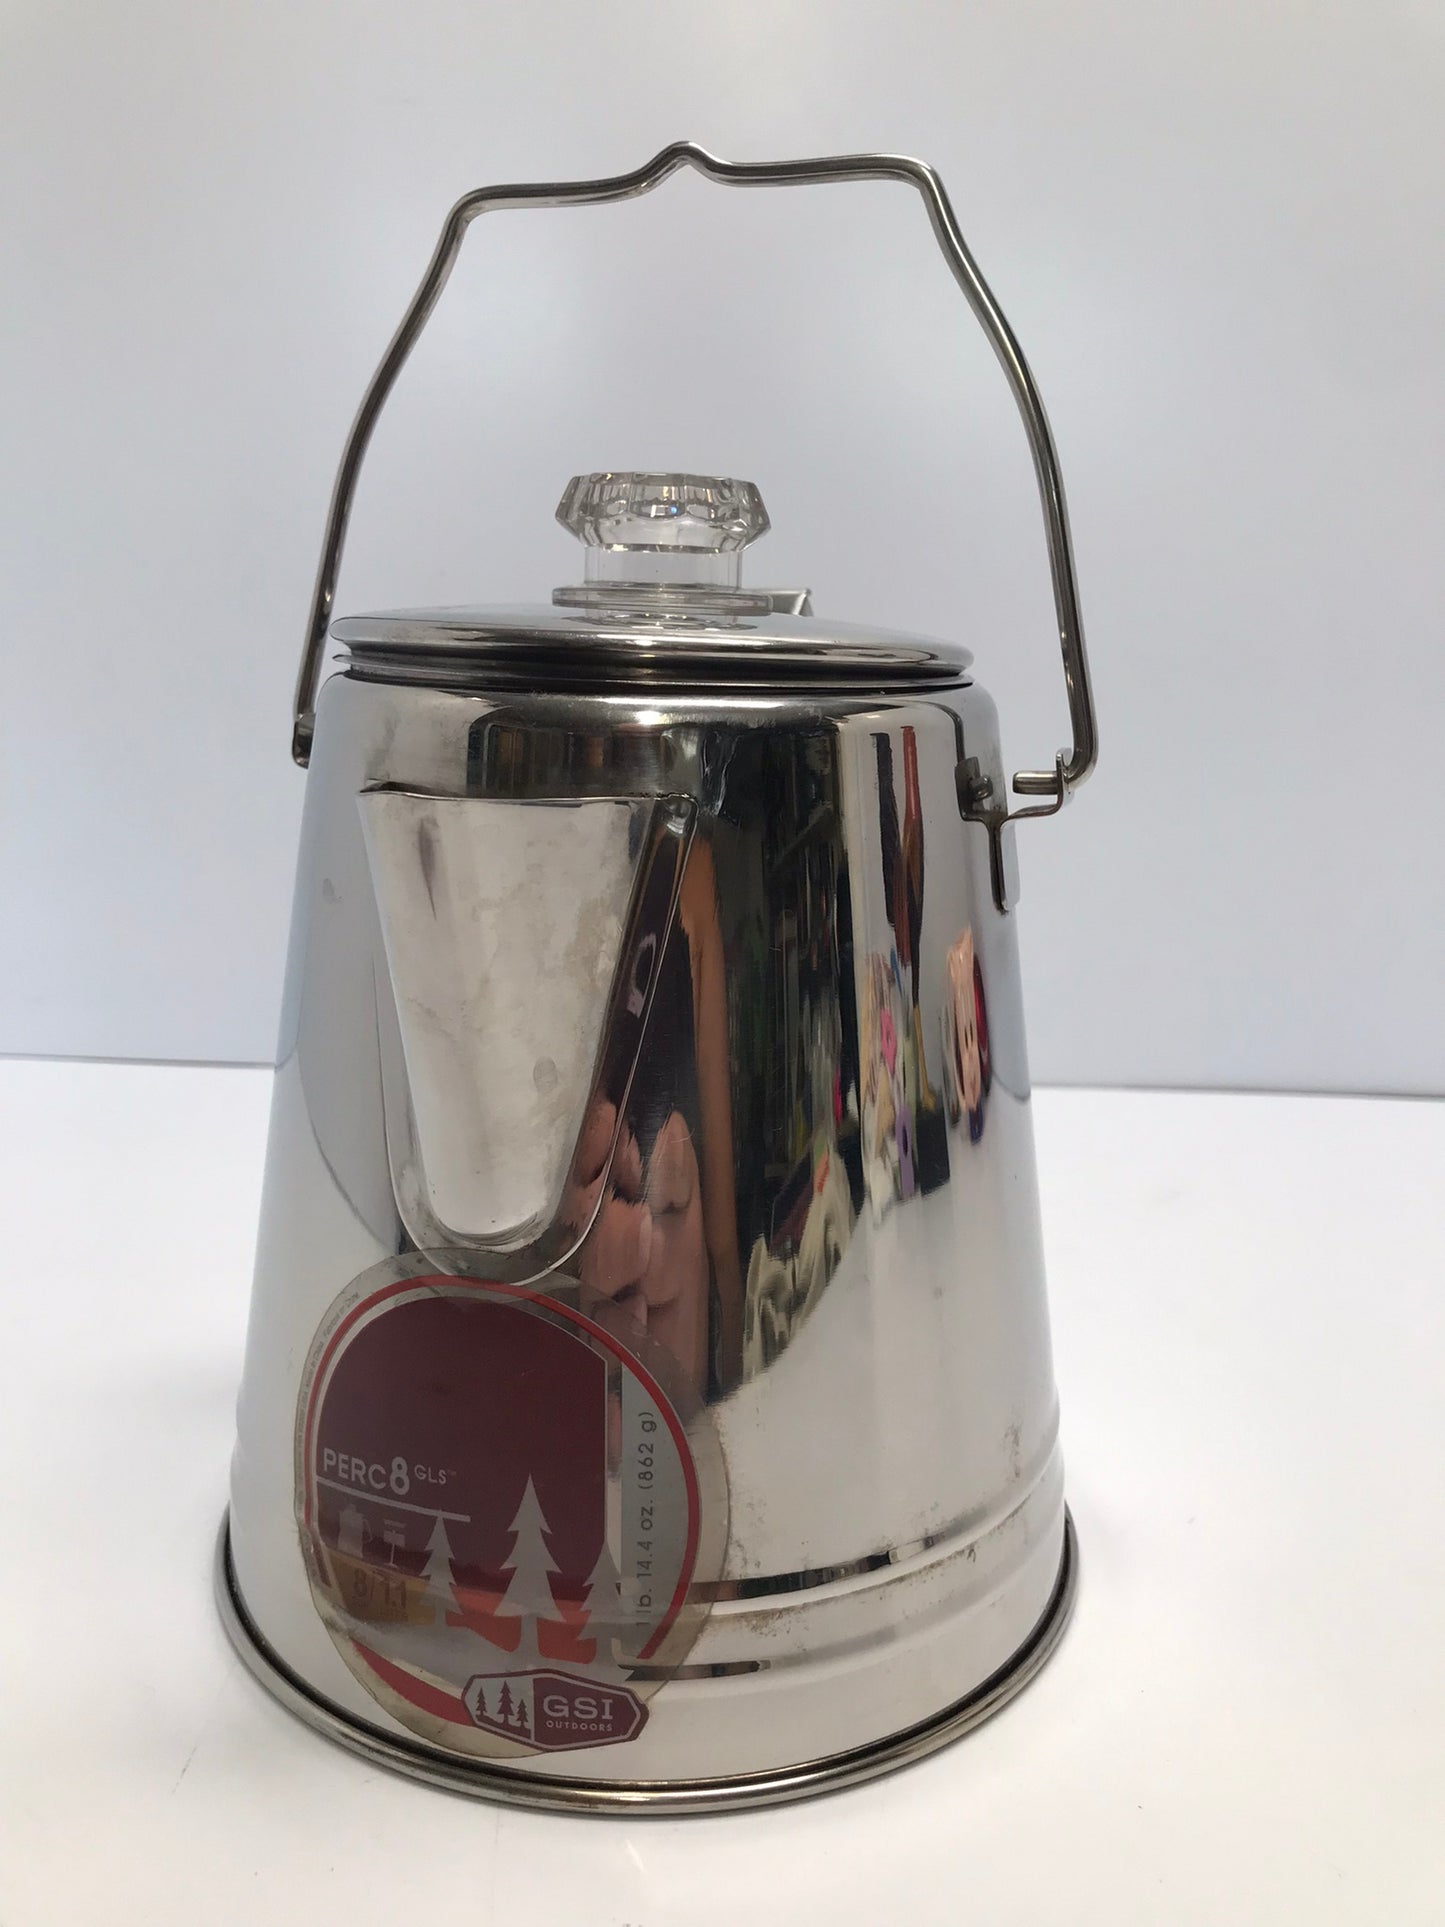 Camping Fishing Stainless 8 Cup Coffee Percolator Coffee Maker Like New Outstanding Quality